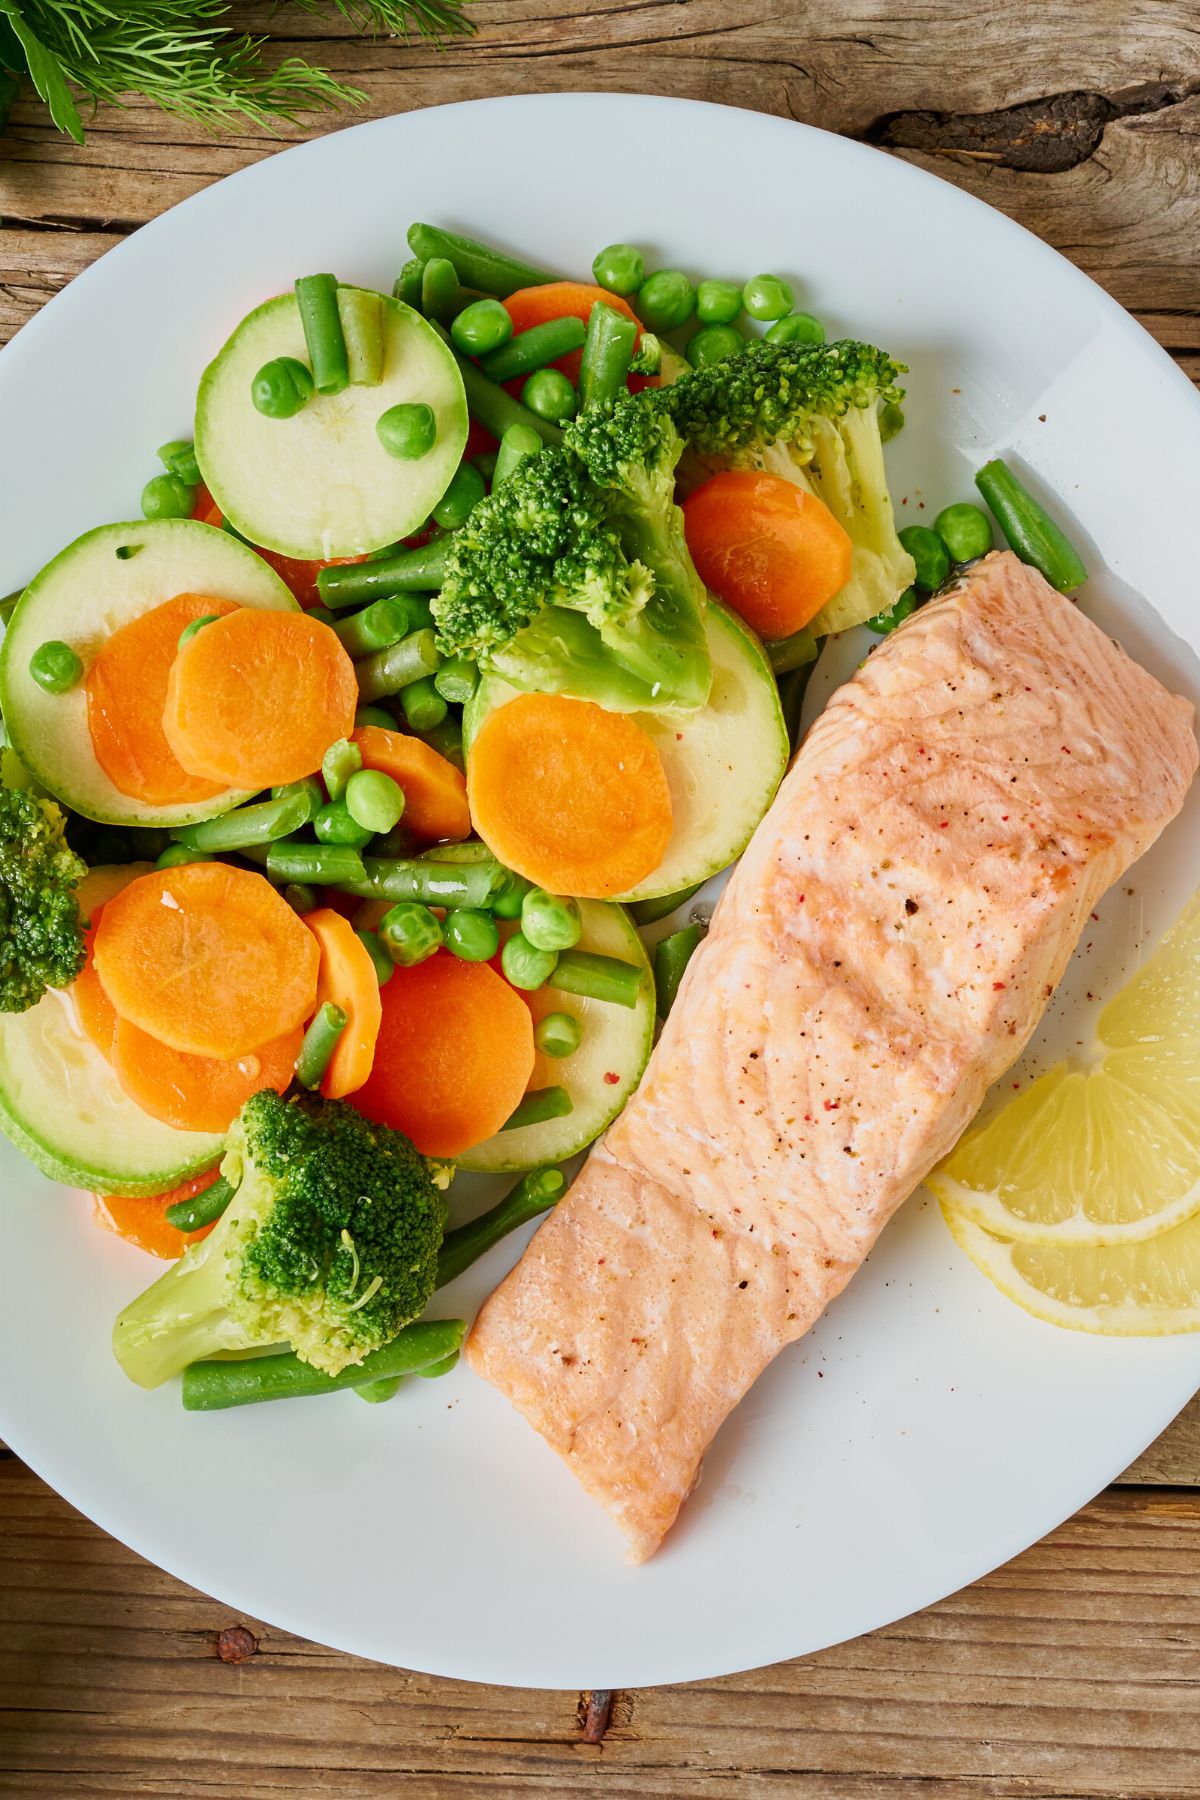 steamed vegetables with salmon served on white plate.